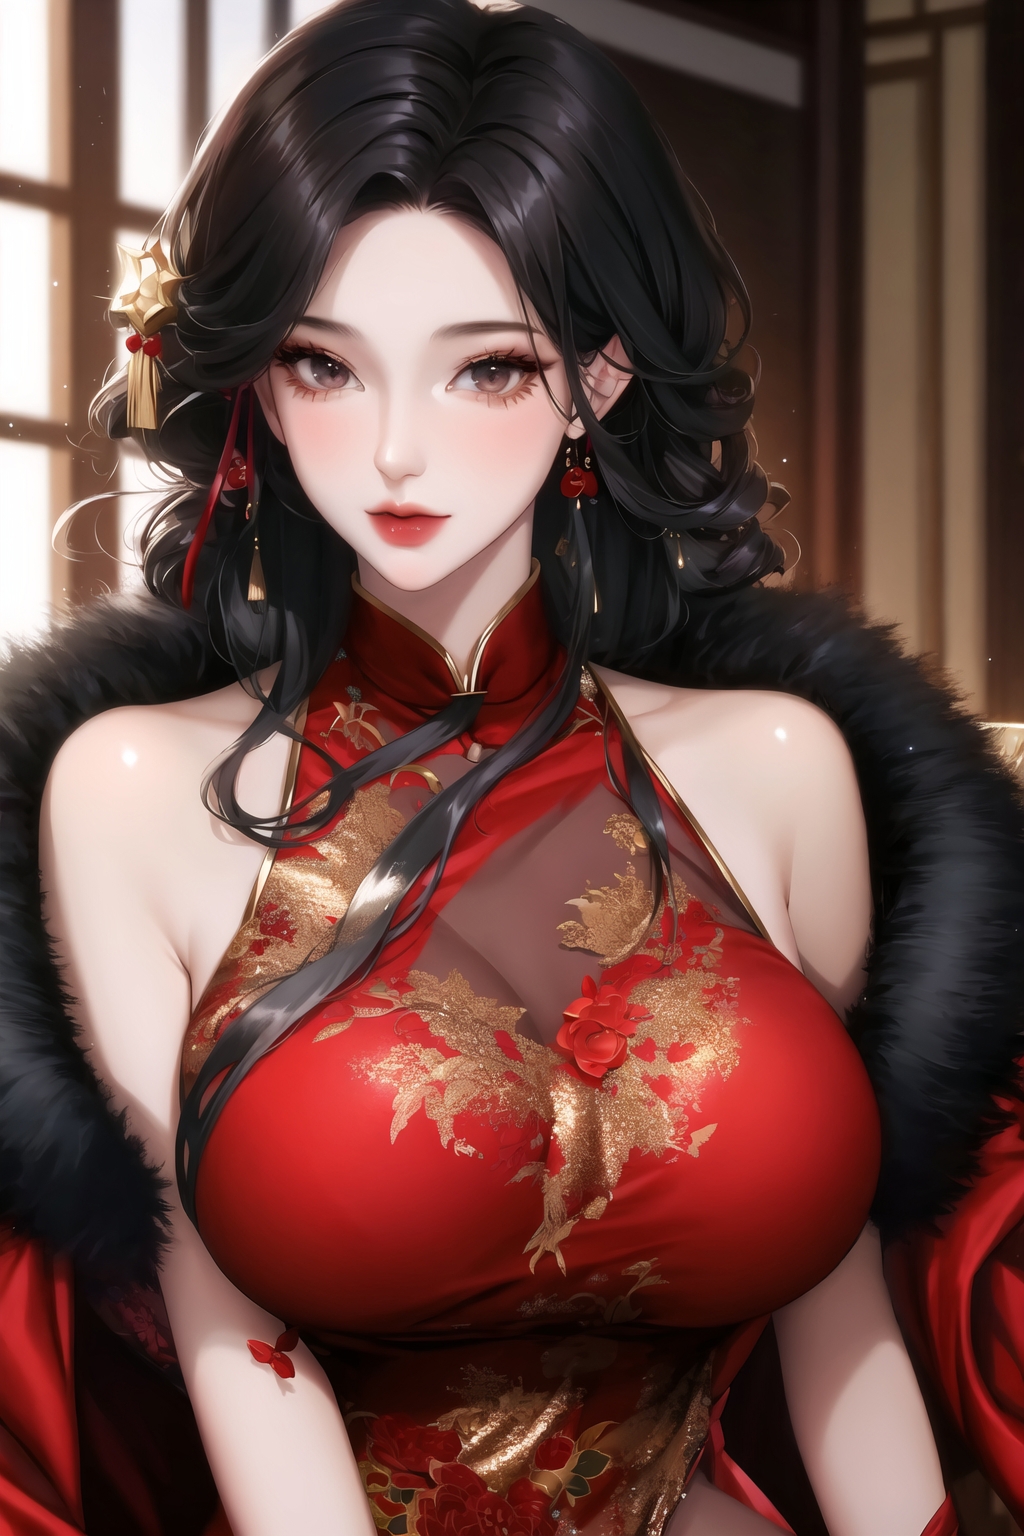 A 3D rendered illustration of a woman wearing a red Chinese dress and a fur coat.